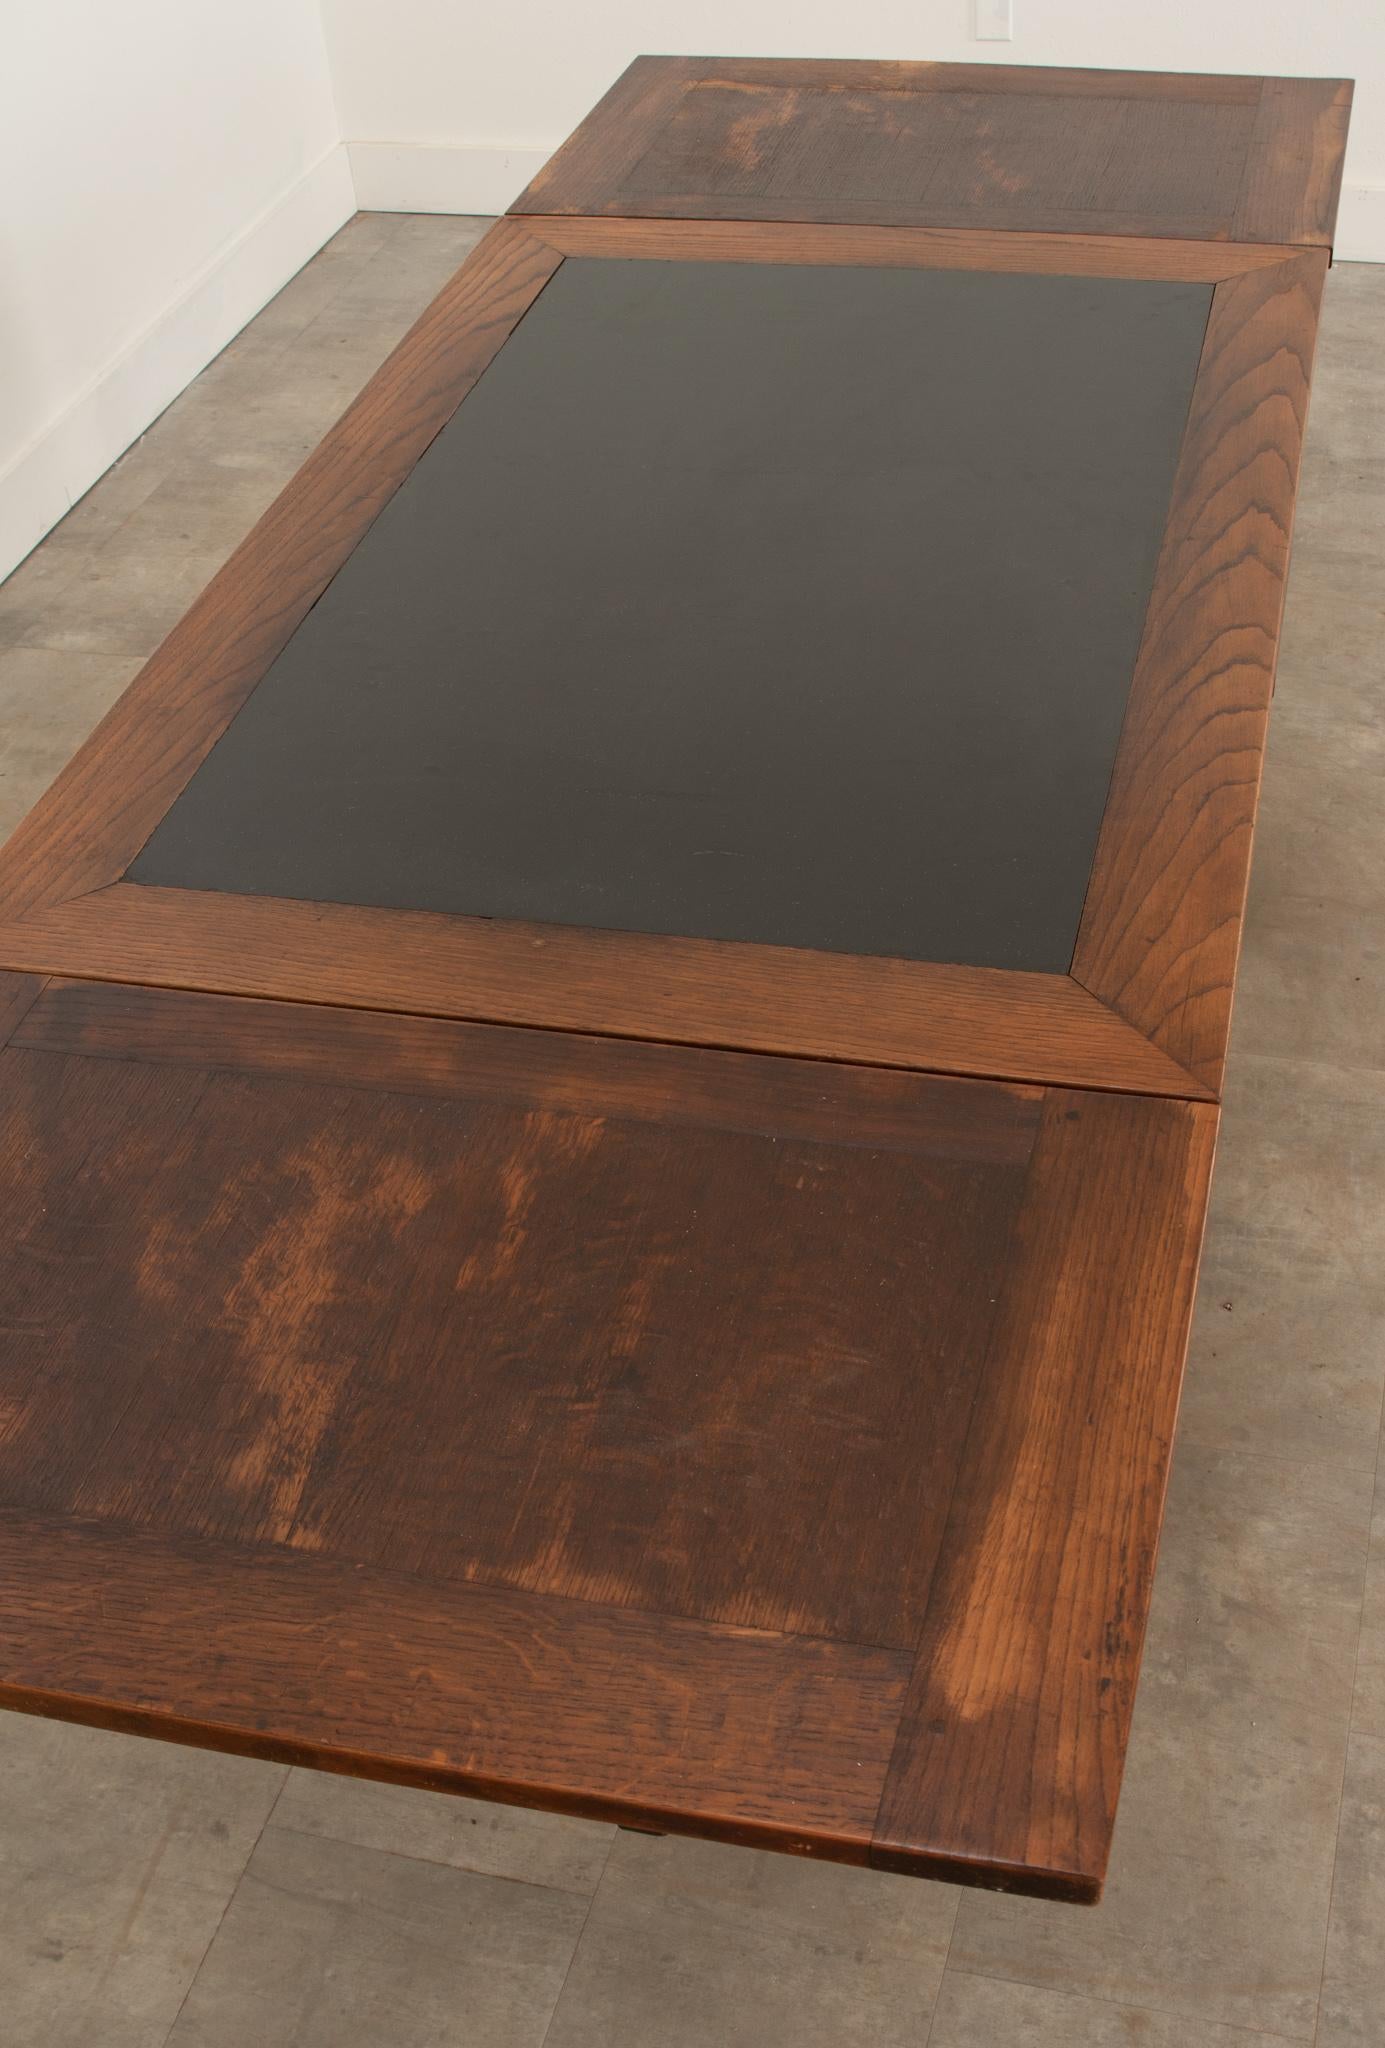 Swiss Draw Leaf Table with Inset Slate Top 2